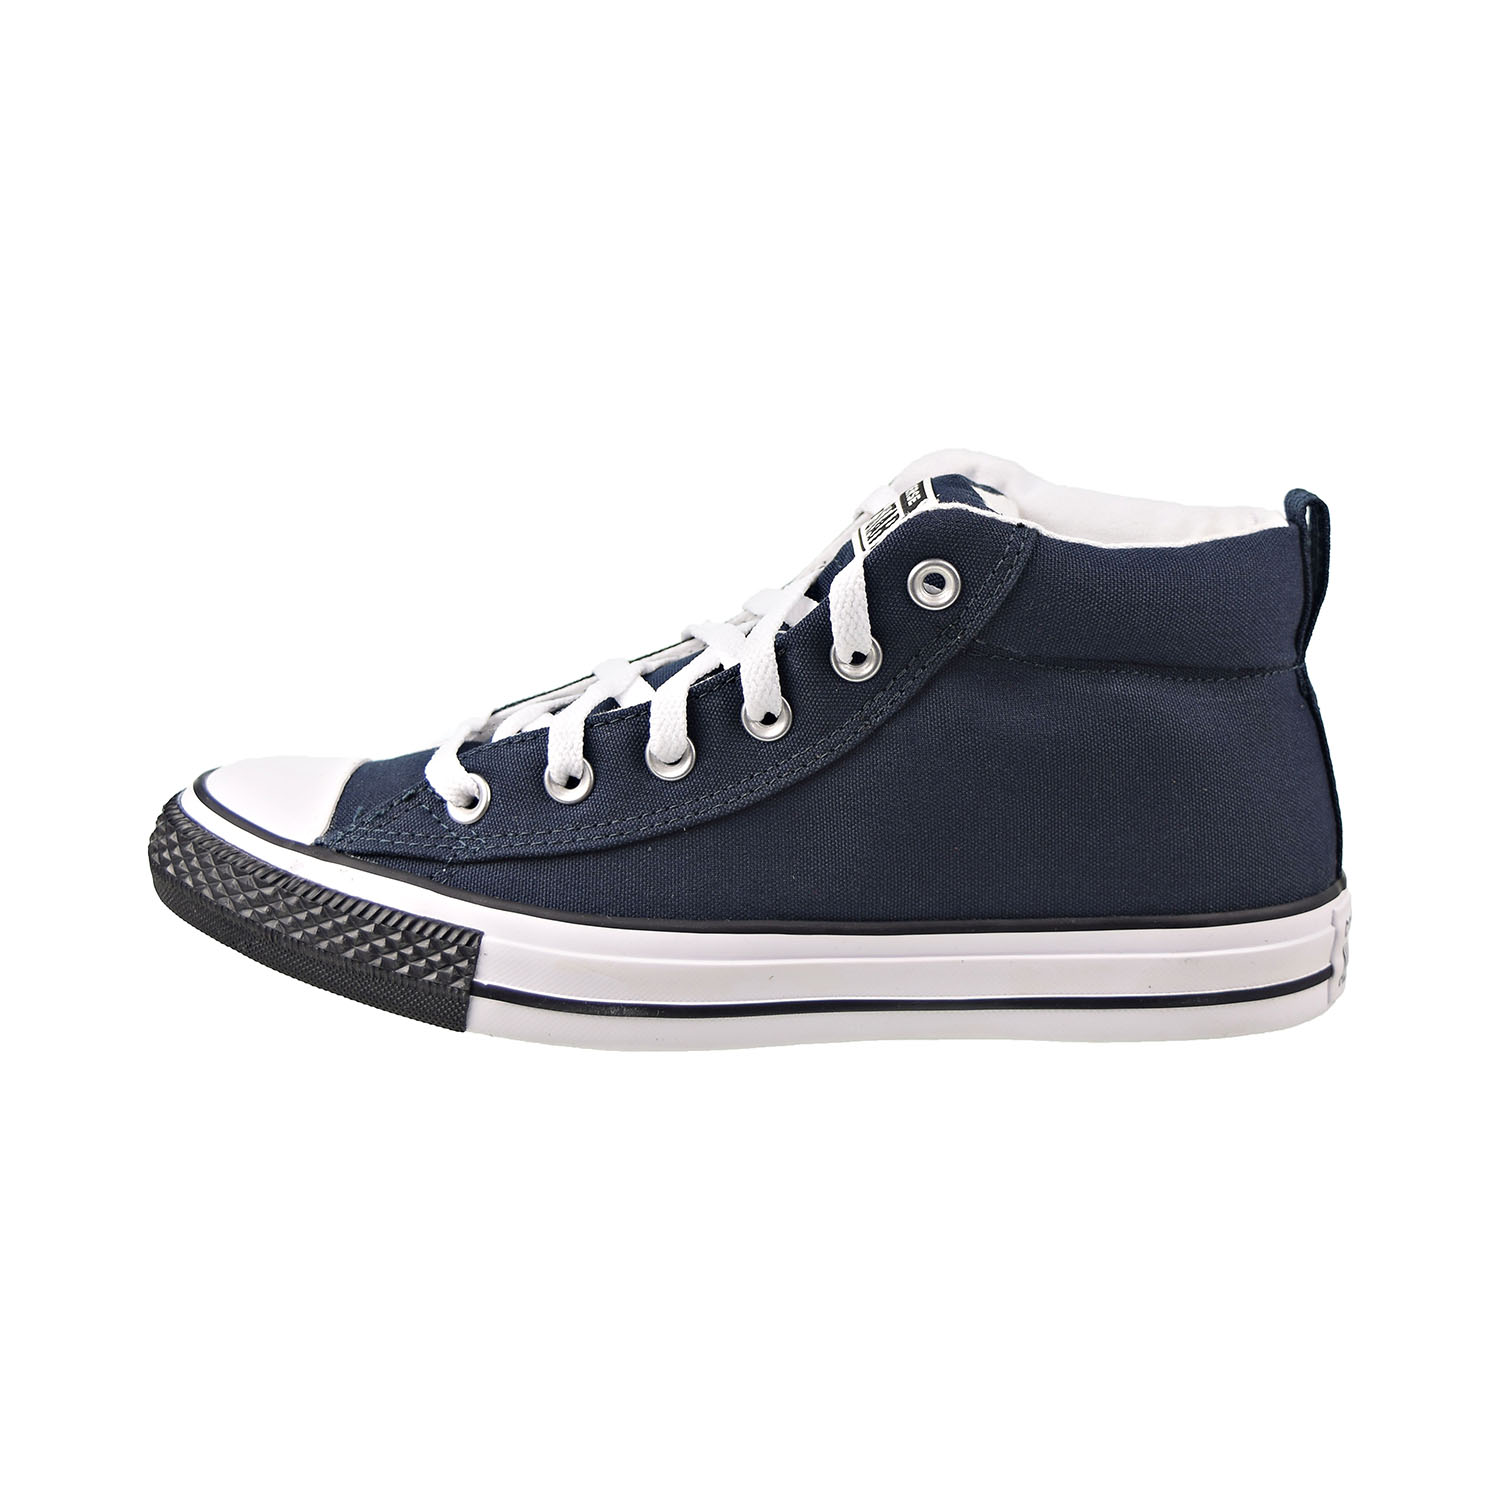 Converse Chuck Taylor All Star Street Mid Men's Shoes Dark Obsidian-White-Black 166337f - image 4 of 6